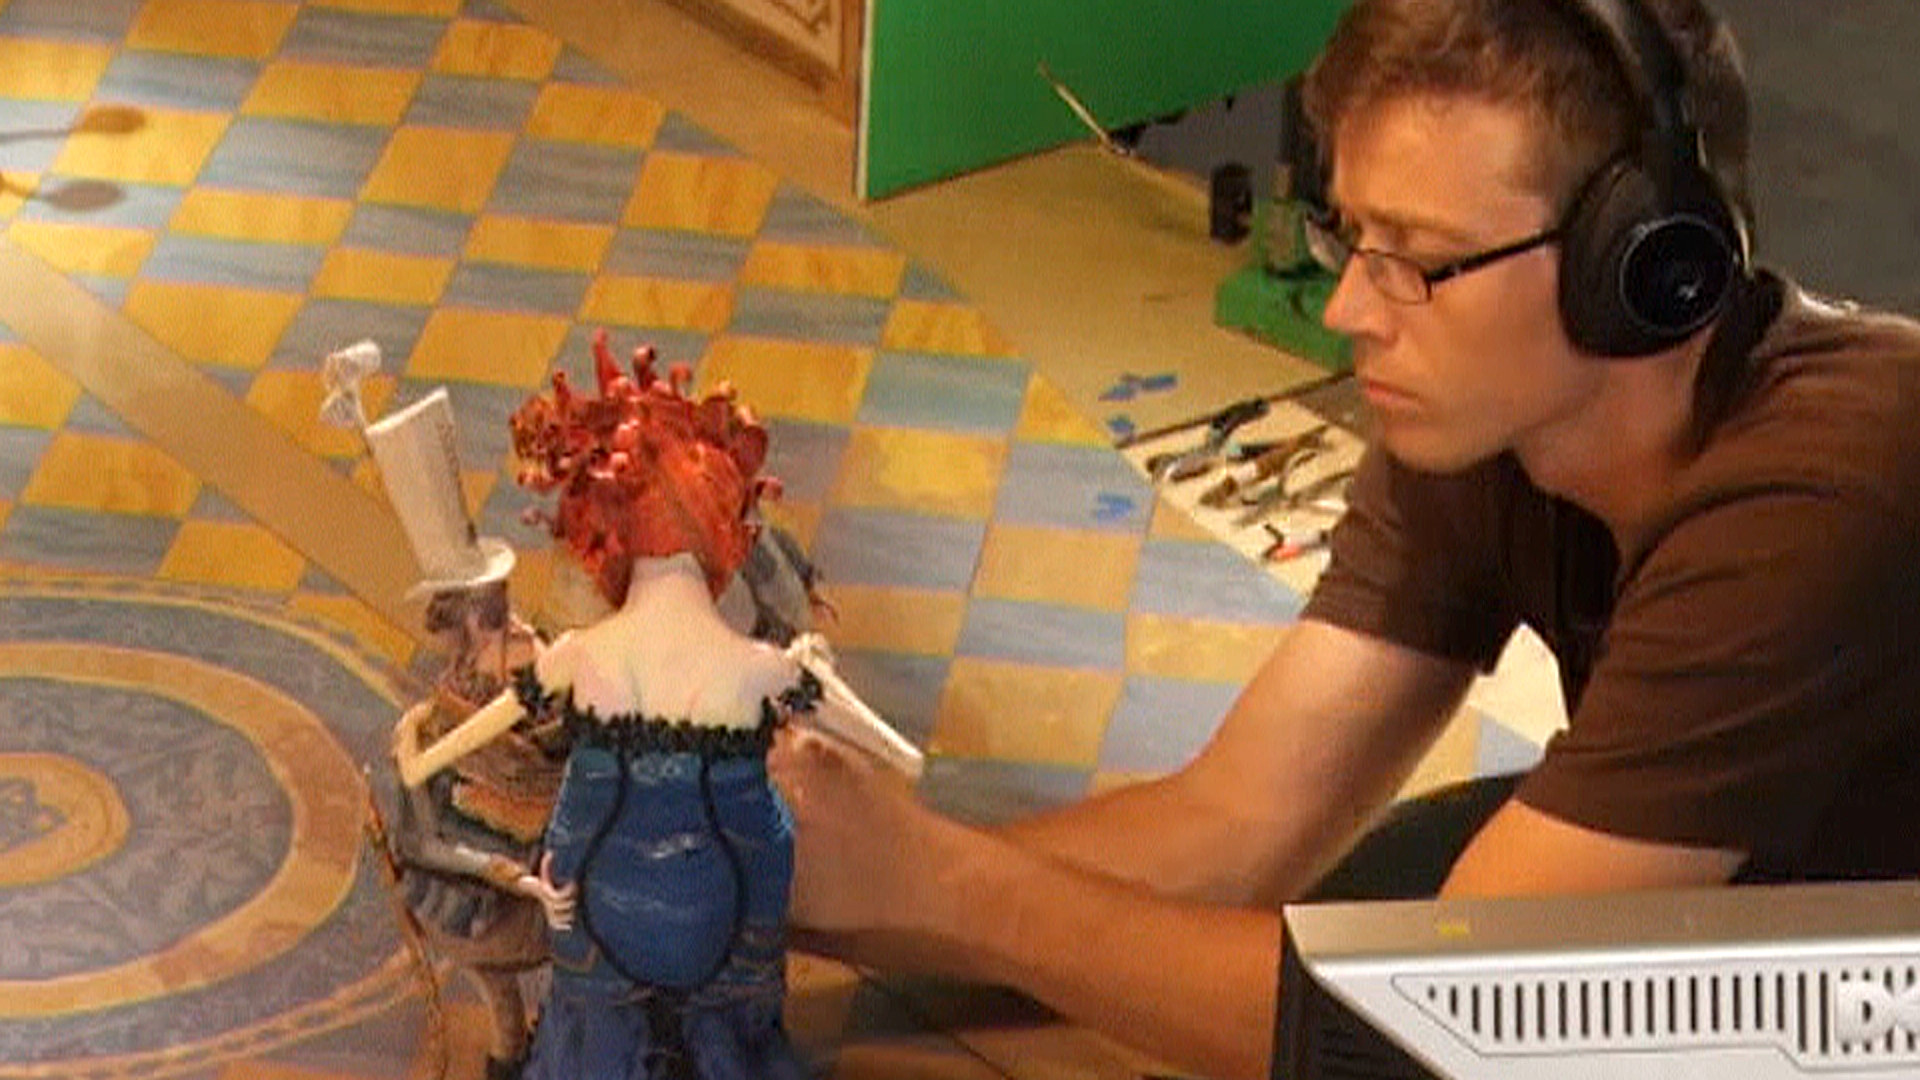 Go behind the scenes of stop-motion animated film 'The.